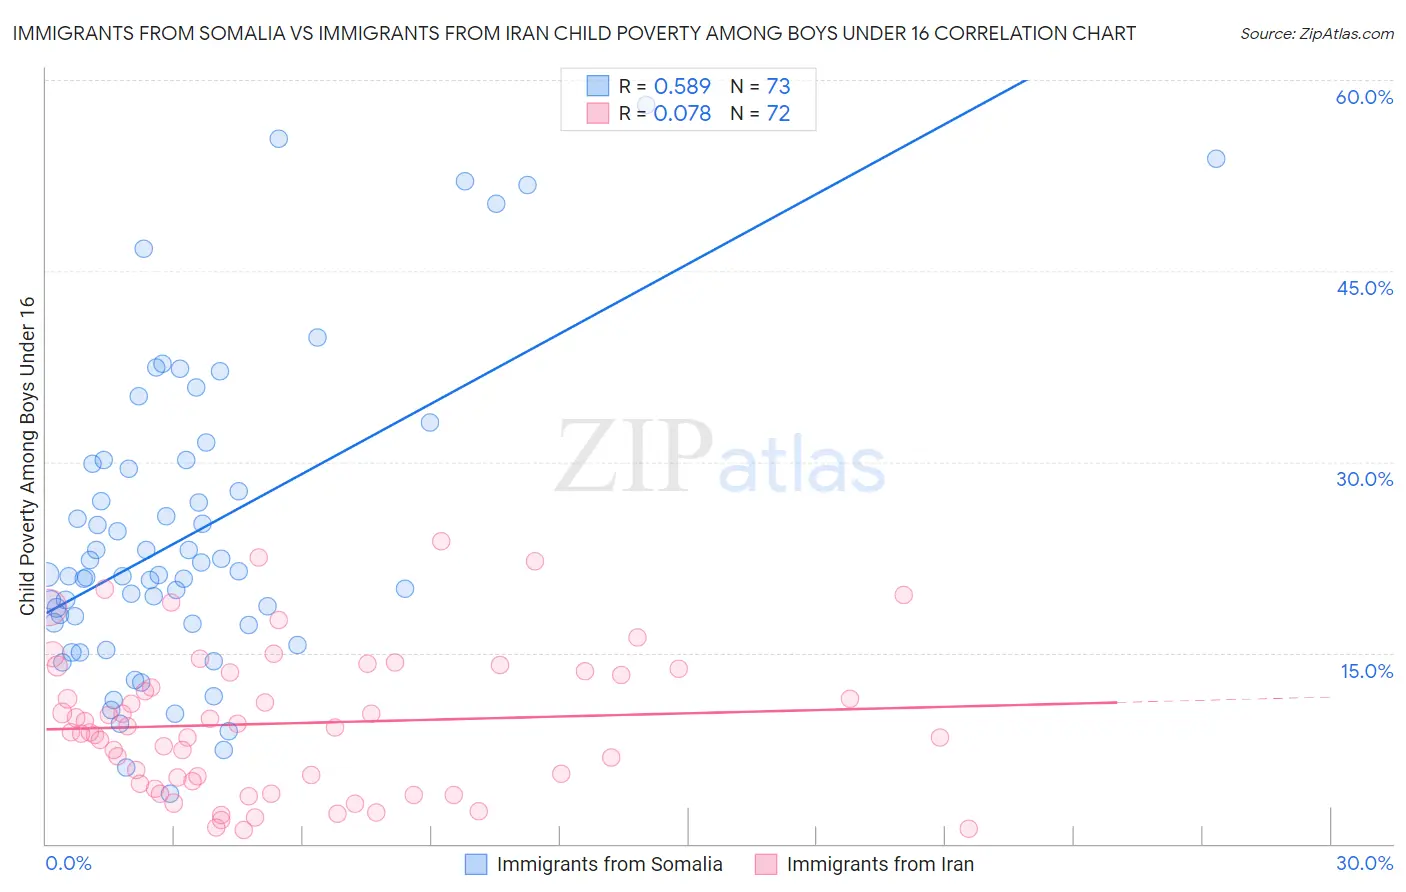 Immigrants from Somalia vs Immigrants from Iran Child Poverty Among Boys Under 16